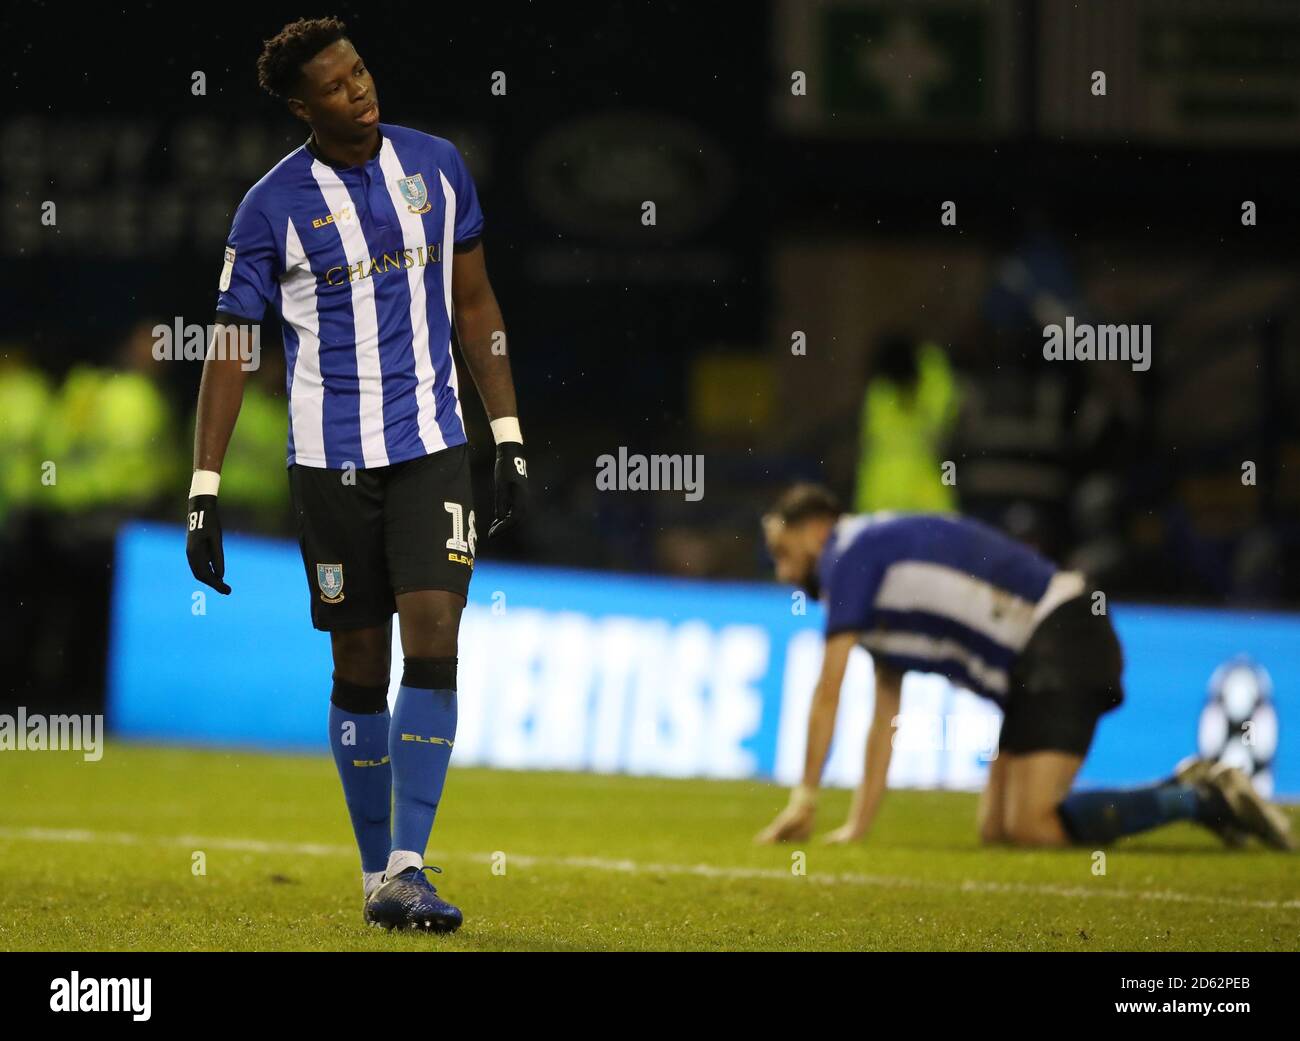 Sheffield Wednesdays Lucas Joao double goalscorer shows dejection after late miss by teammate Sheffield Wednesdays Atdhe Nuhiu (right Stock Photo 